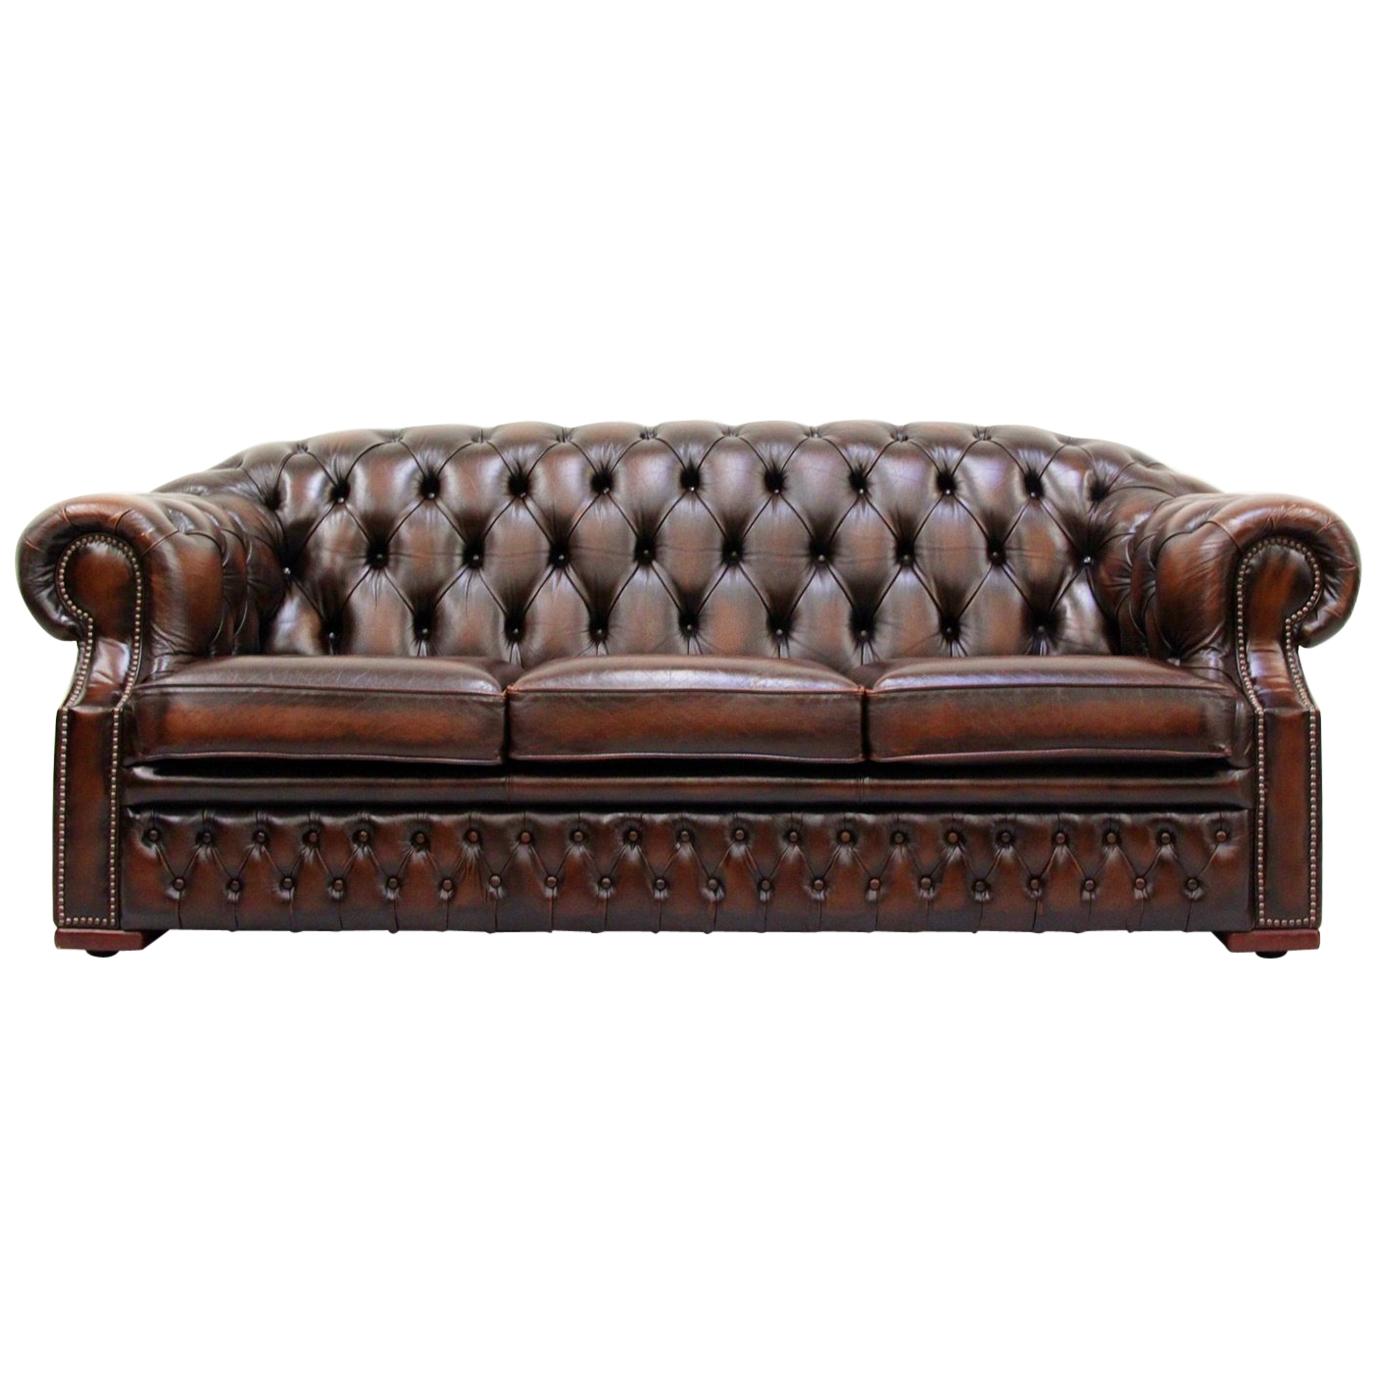 Chesterfield Centurion Sofa Leather Antique Vintage Couch, English For Sale